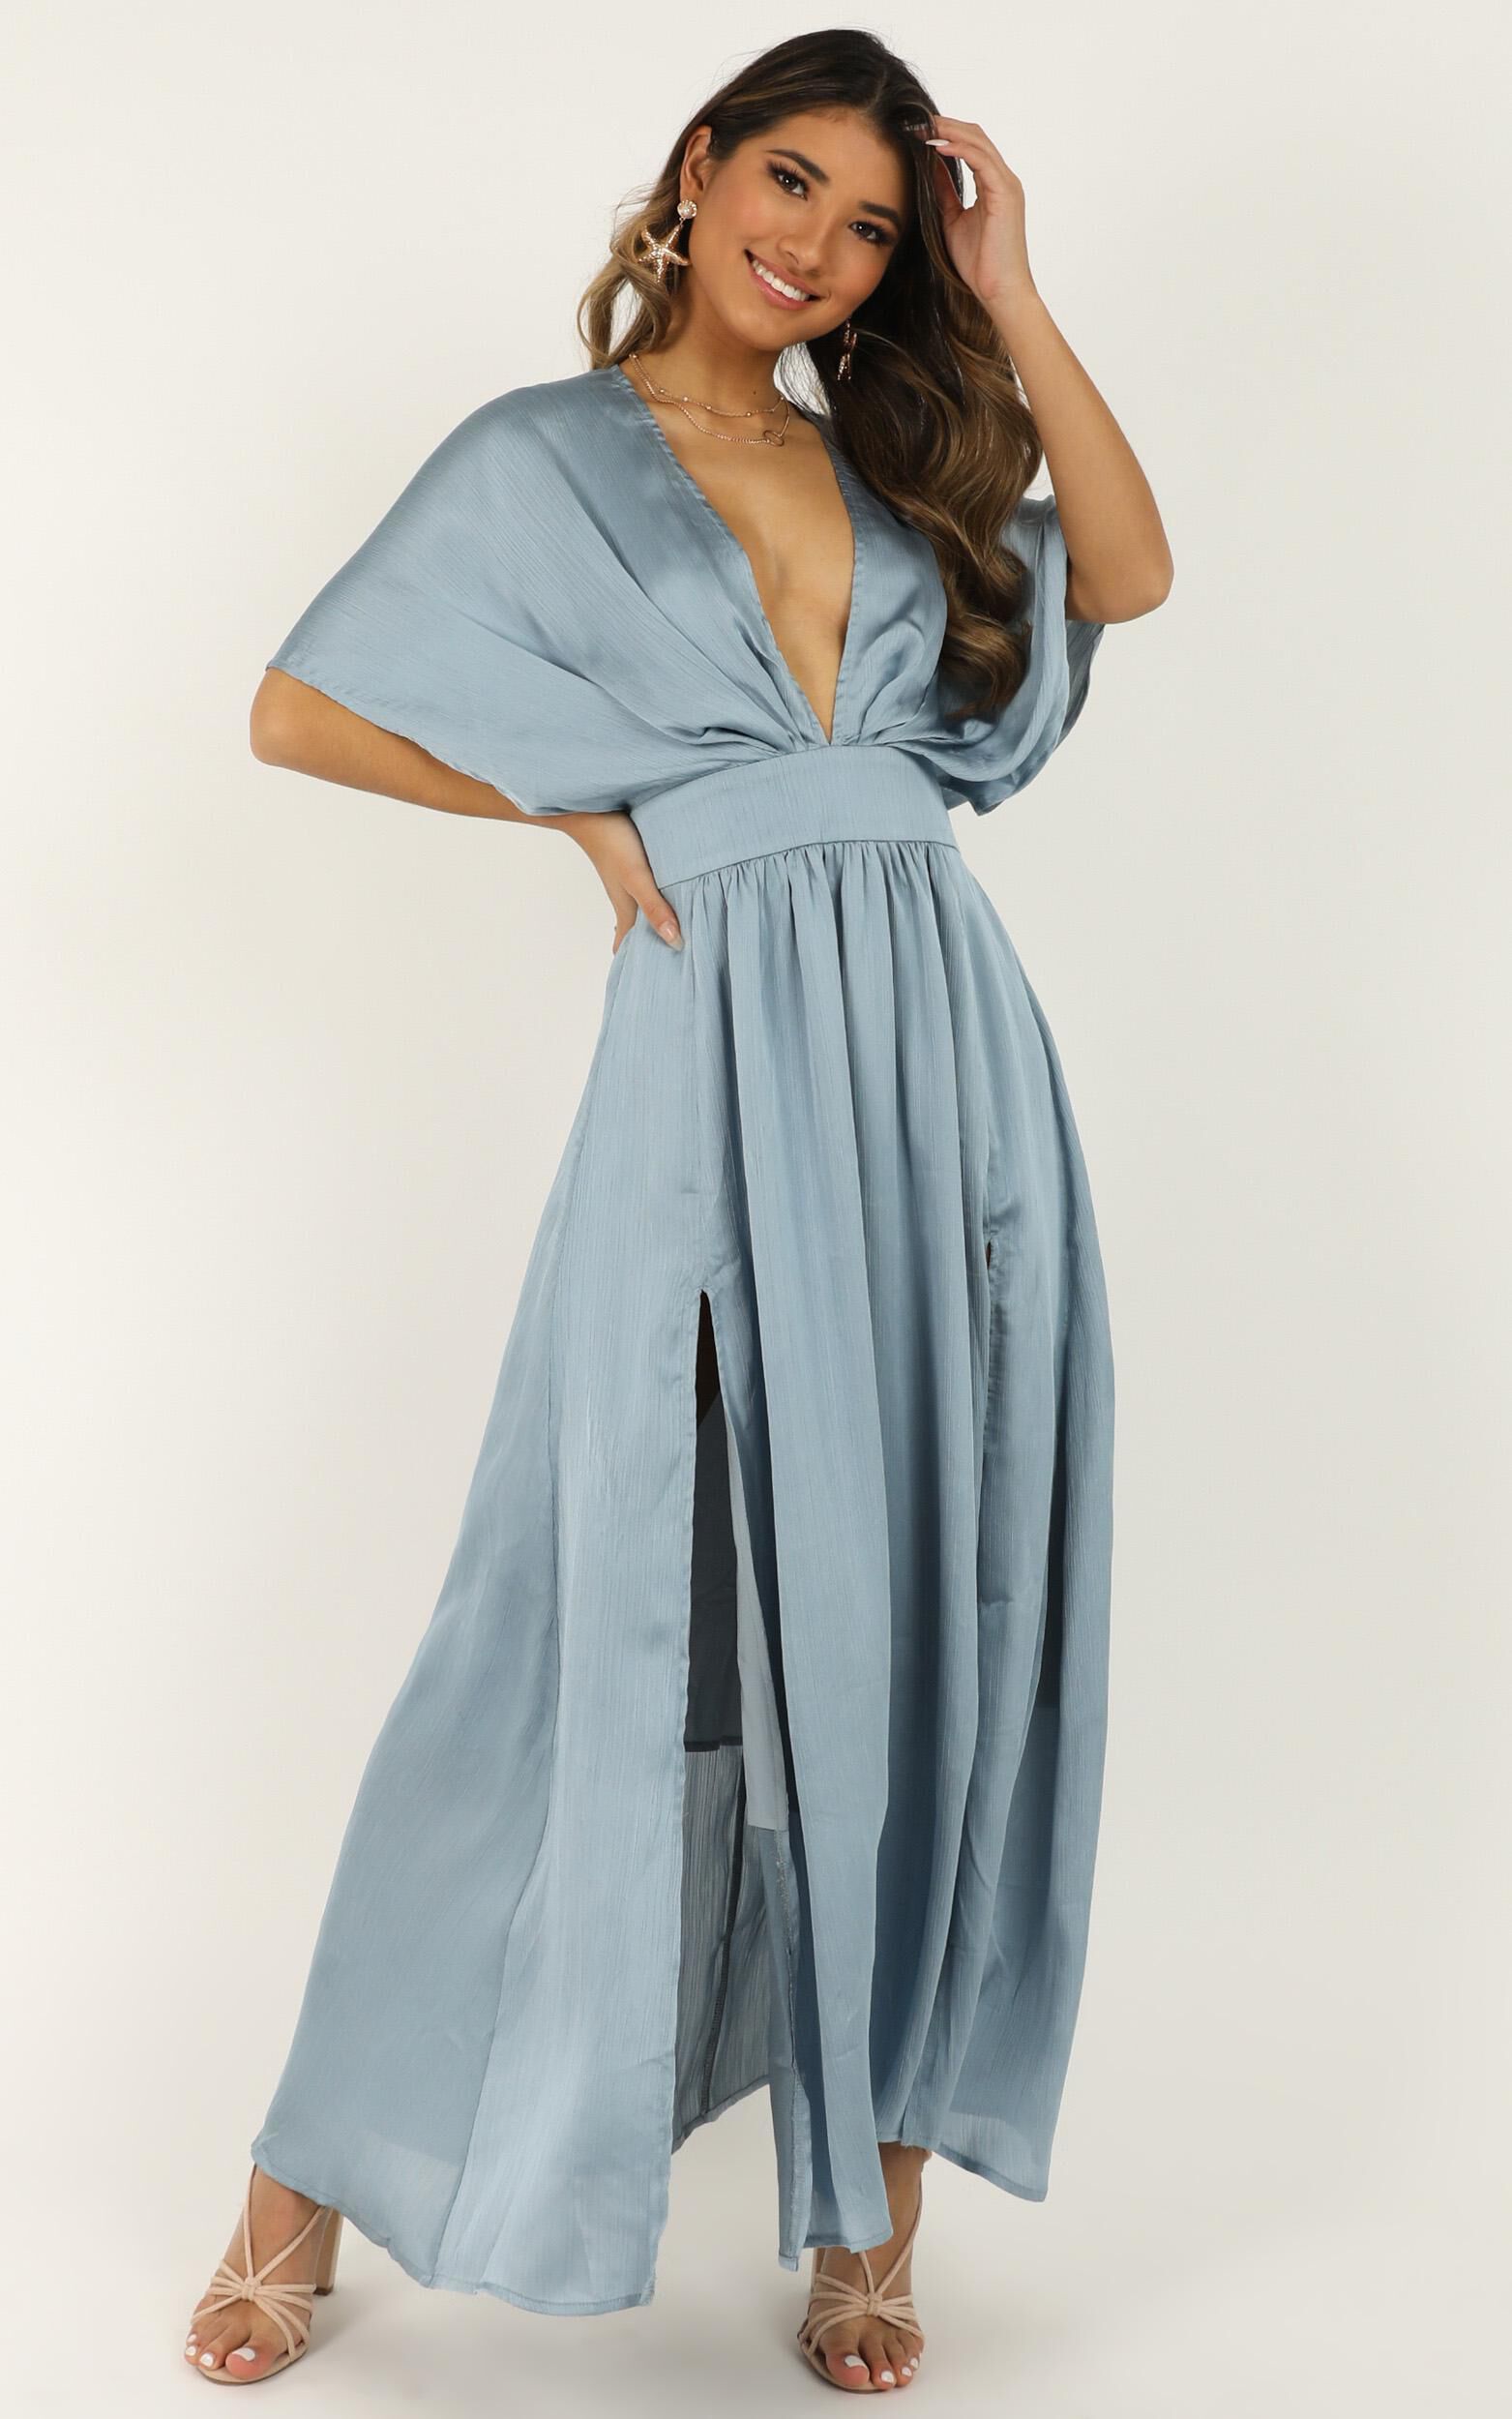 Save It For Later Dress in Dusty Blue Satin | Showpo USA